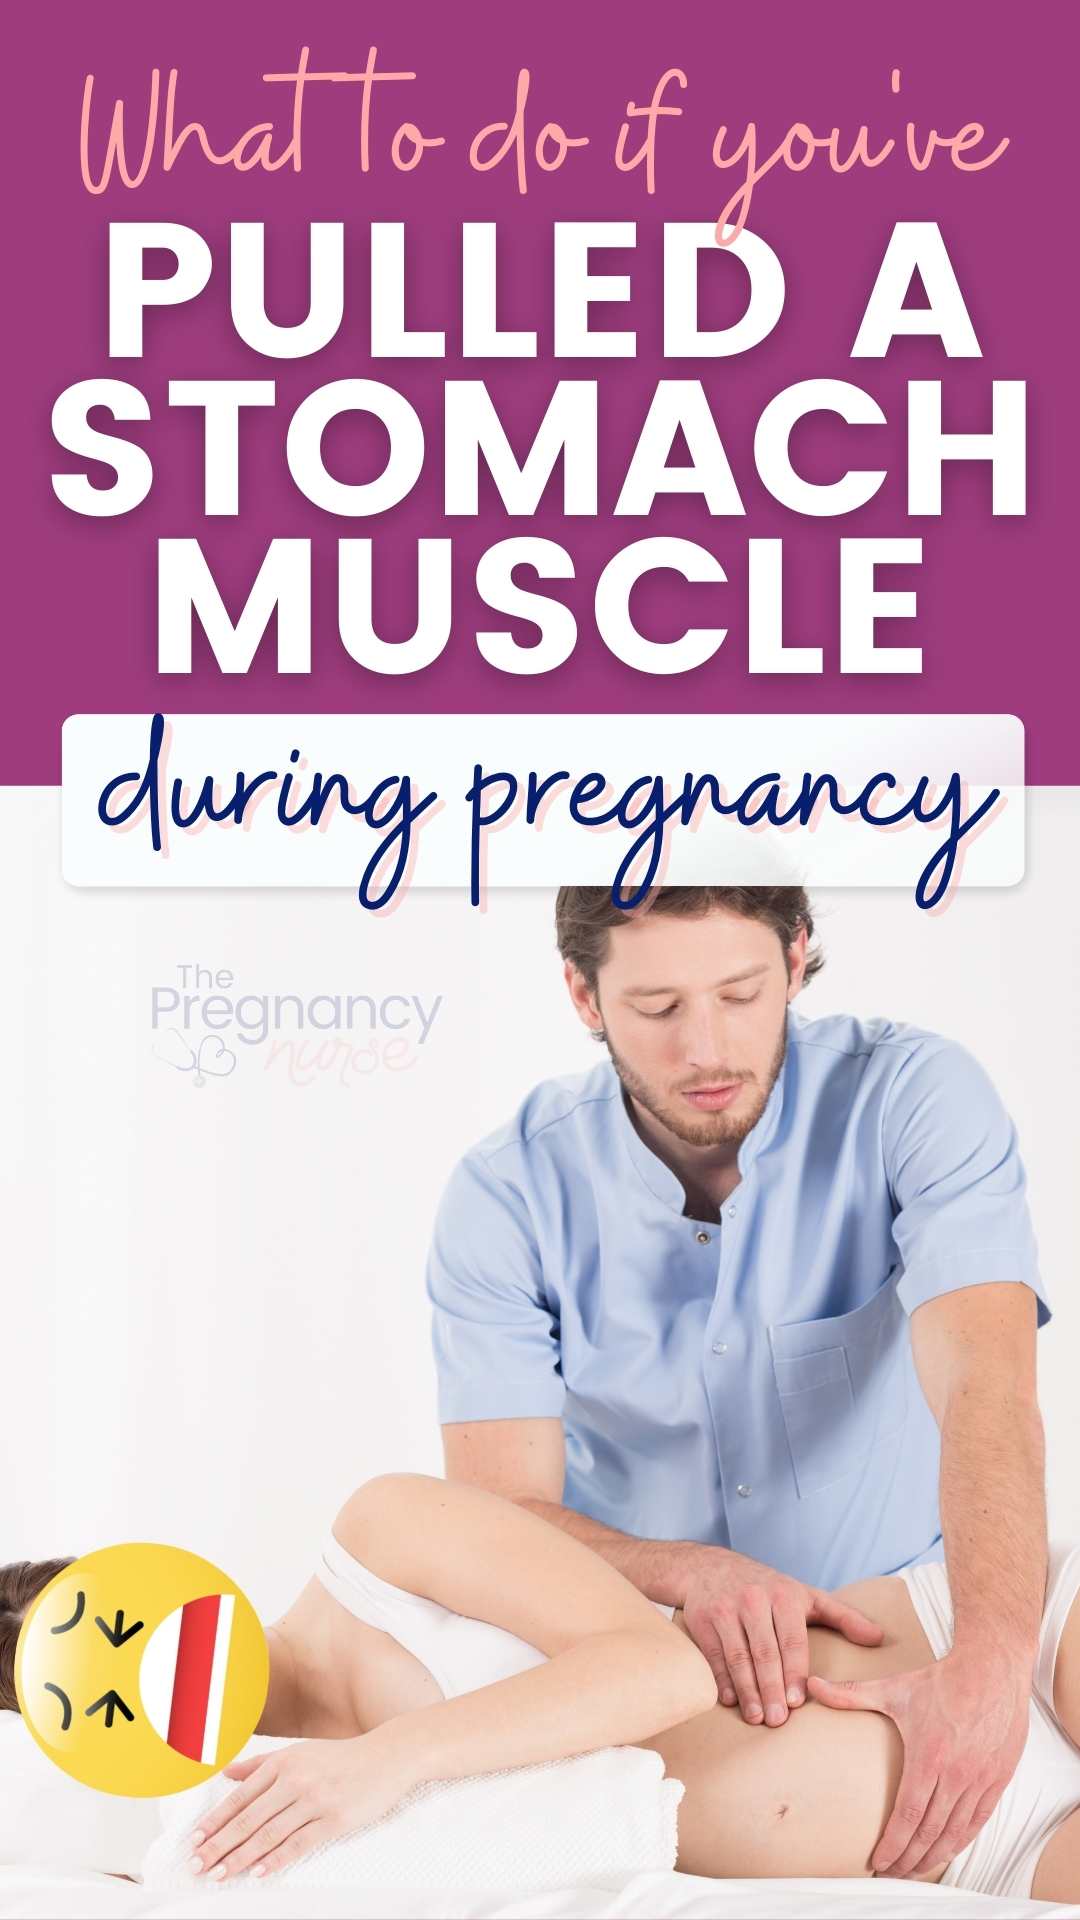 Pregnancy can be a beautiful time, but it can also be uncomfortable. If you are experiencing pain from a pulled stomach muscle, here are some tips to help ease the discomfort. Remember to always consult with your doctor if you have any concerns.